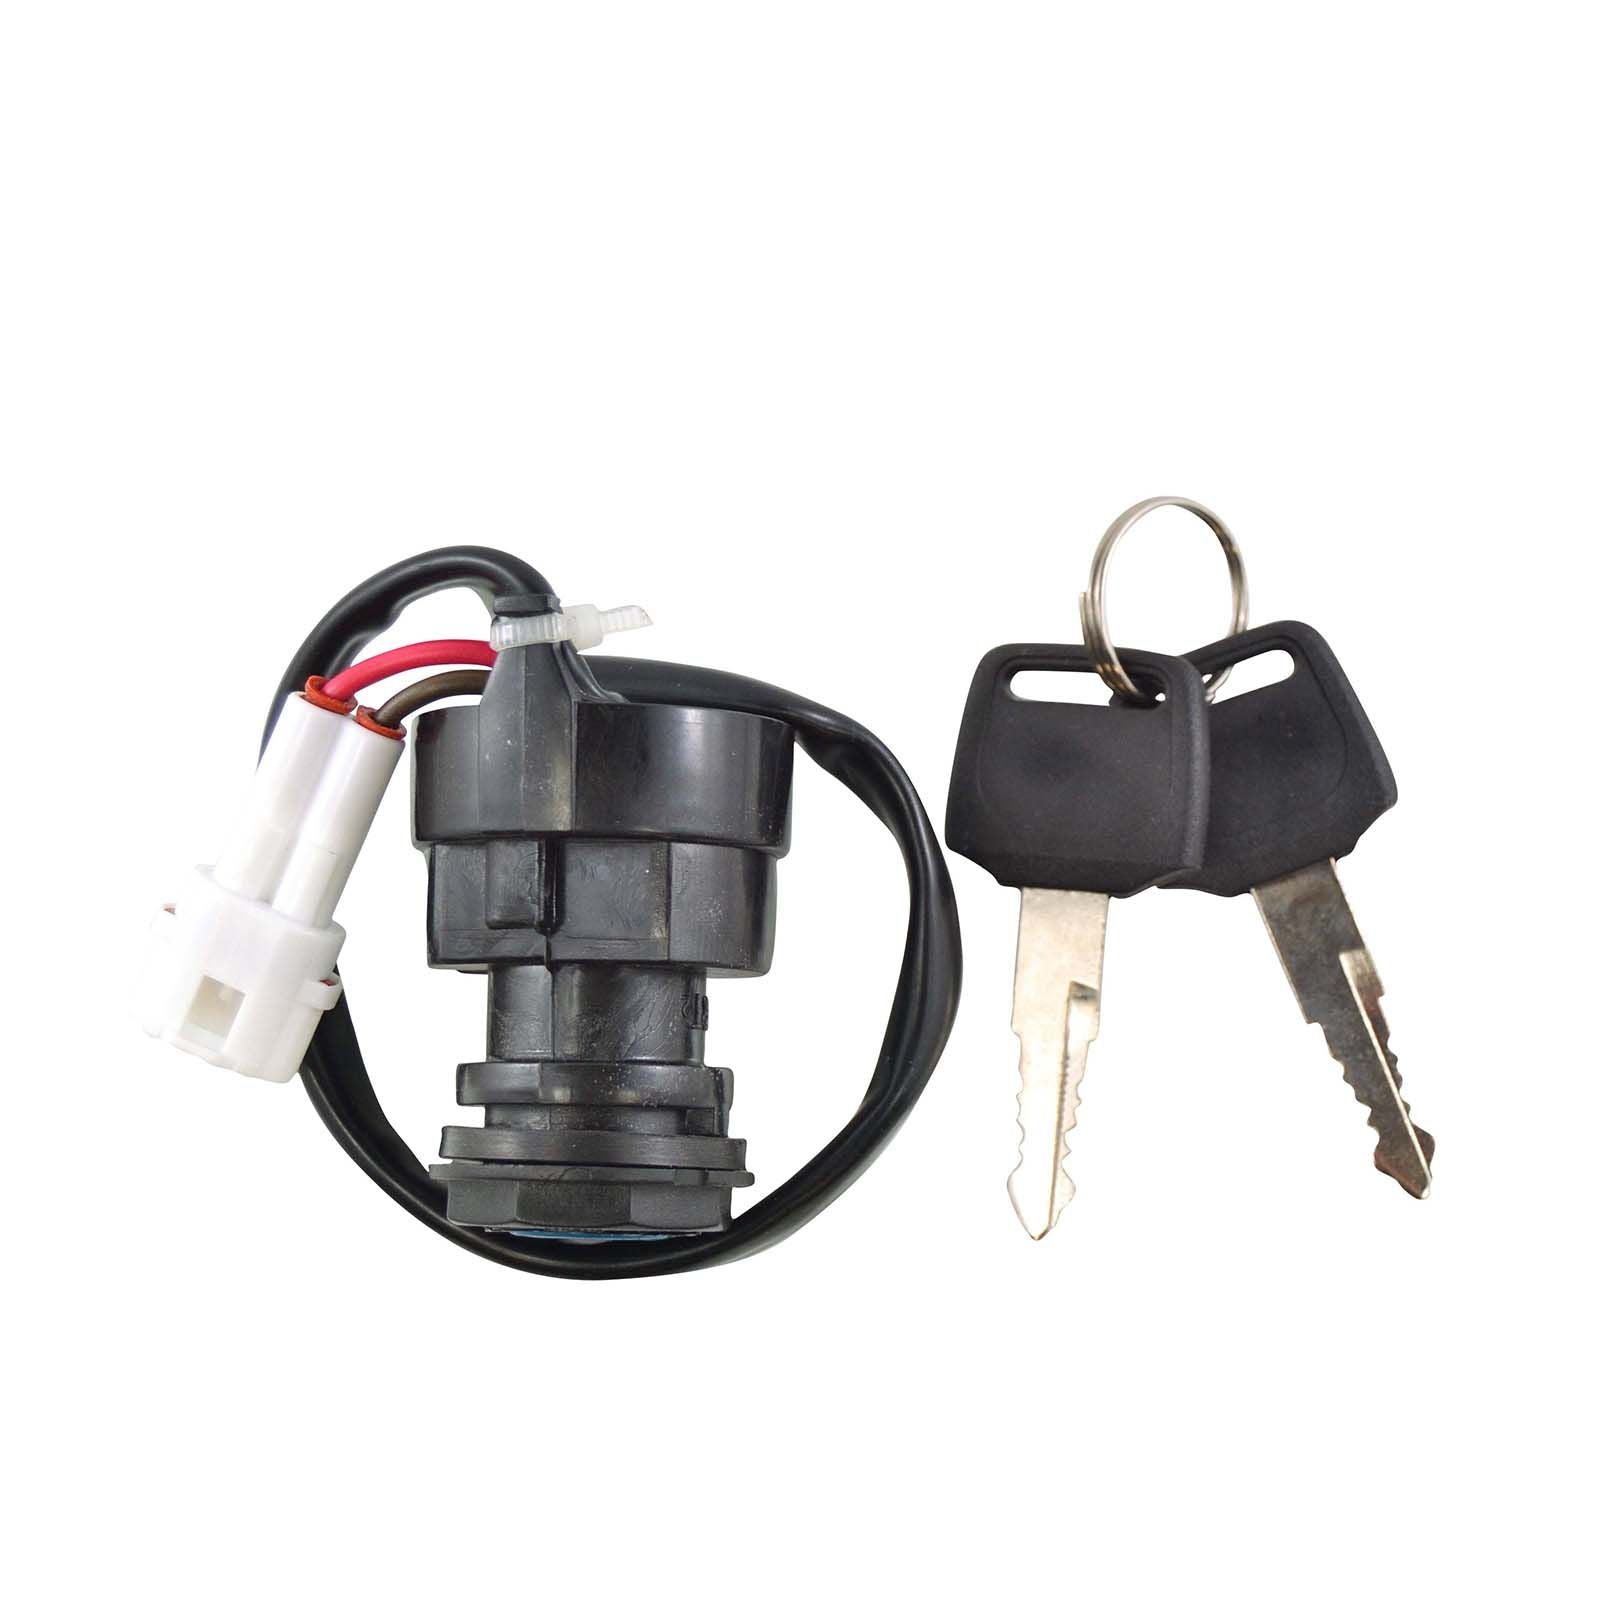 RMSTATOR 2-Position Ignition Key Switch - Assorted For Yamaha Models #RMS05002